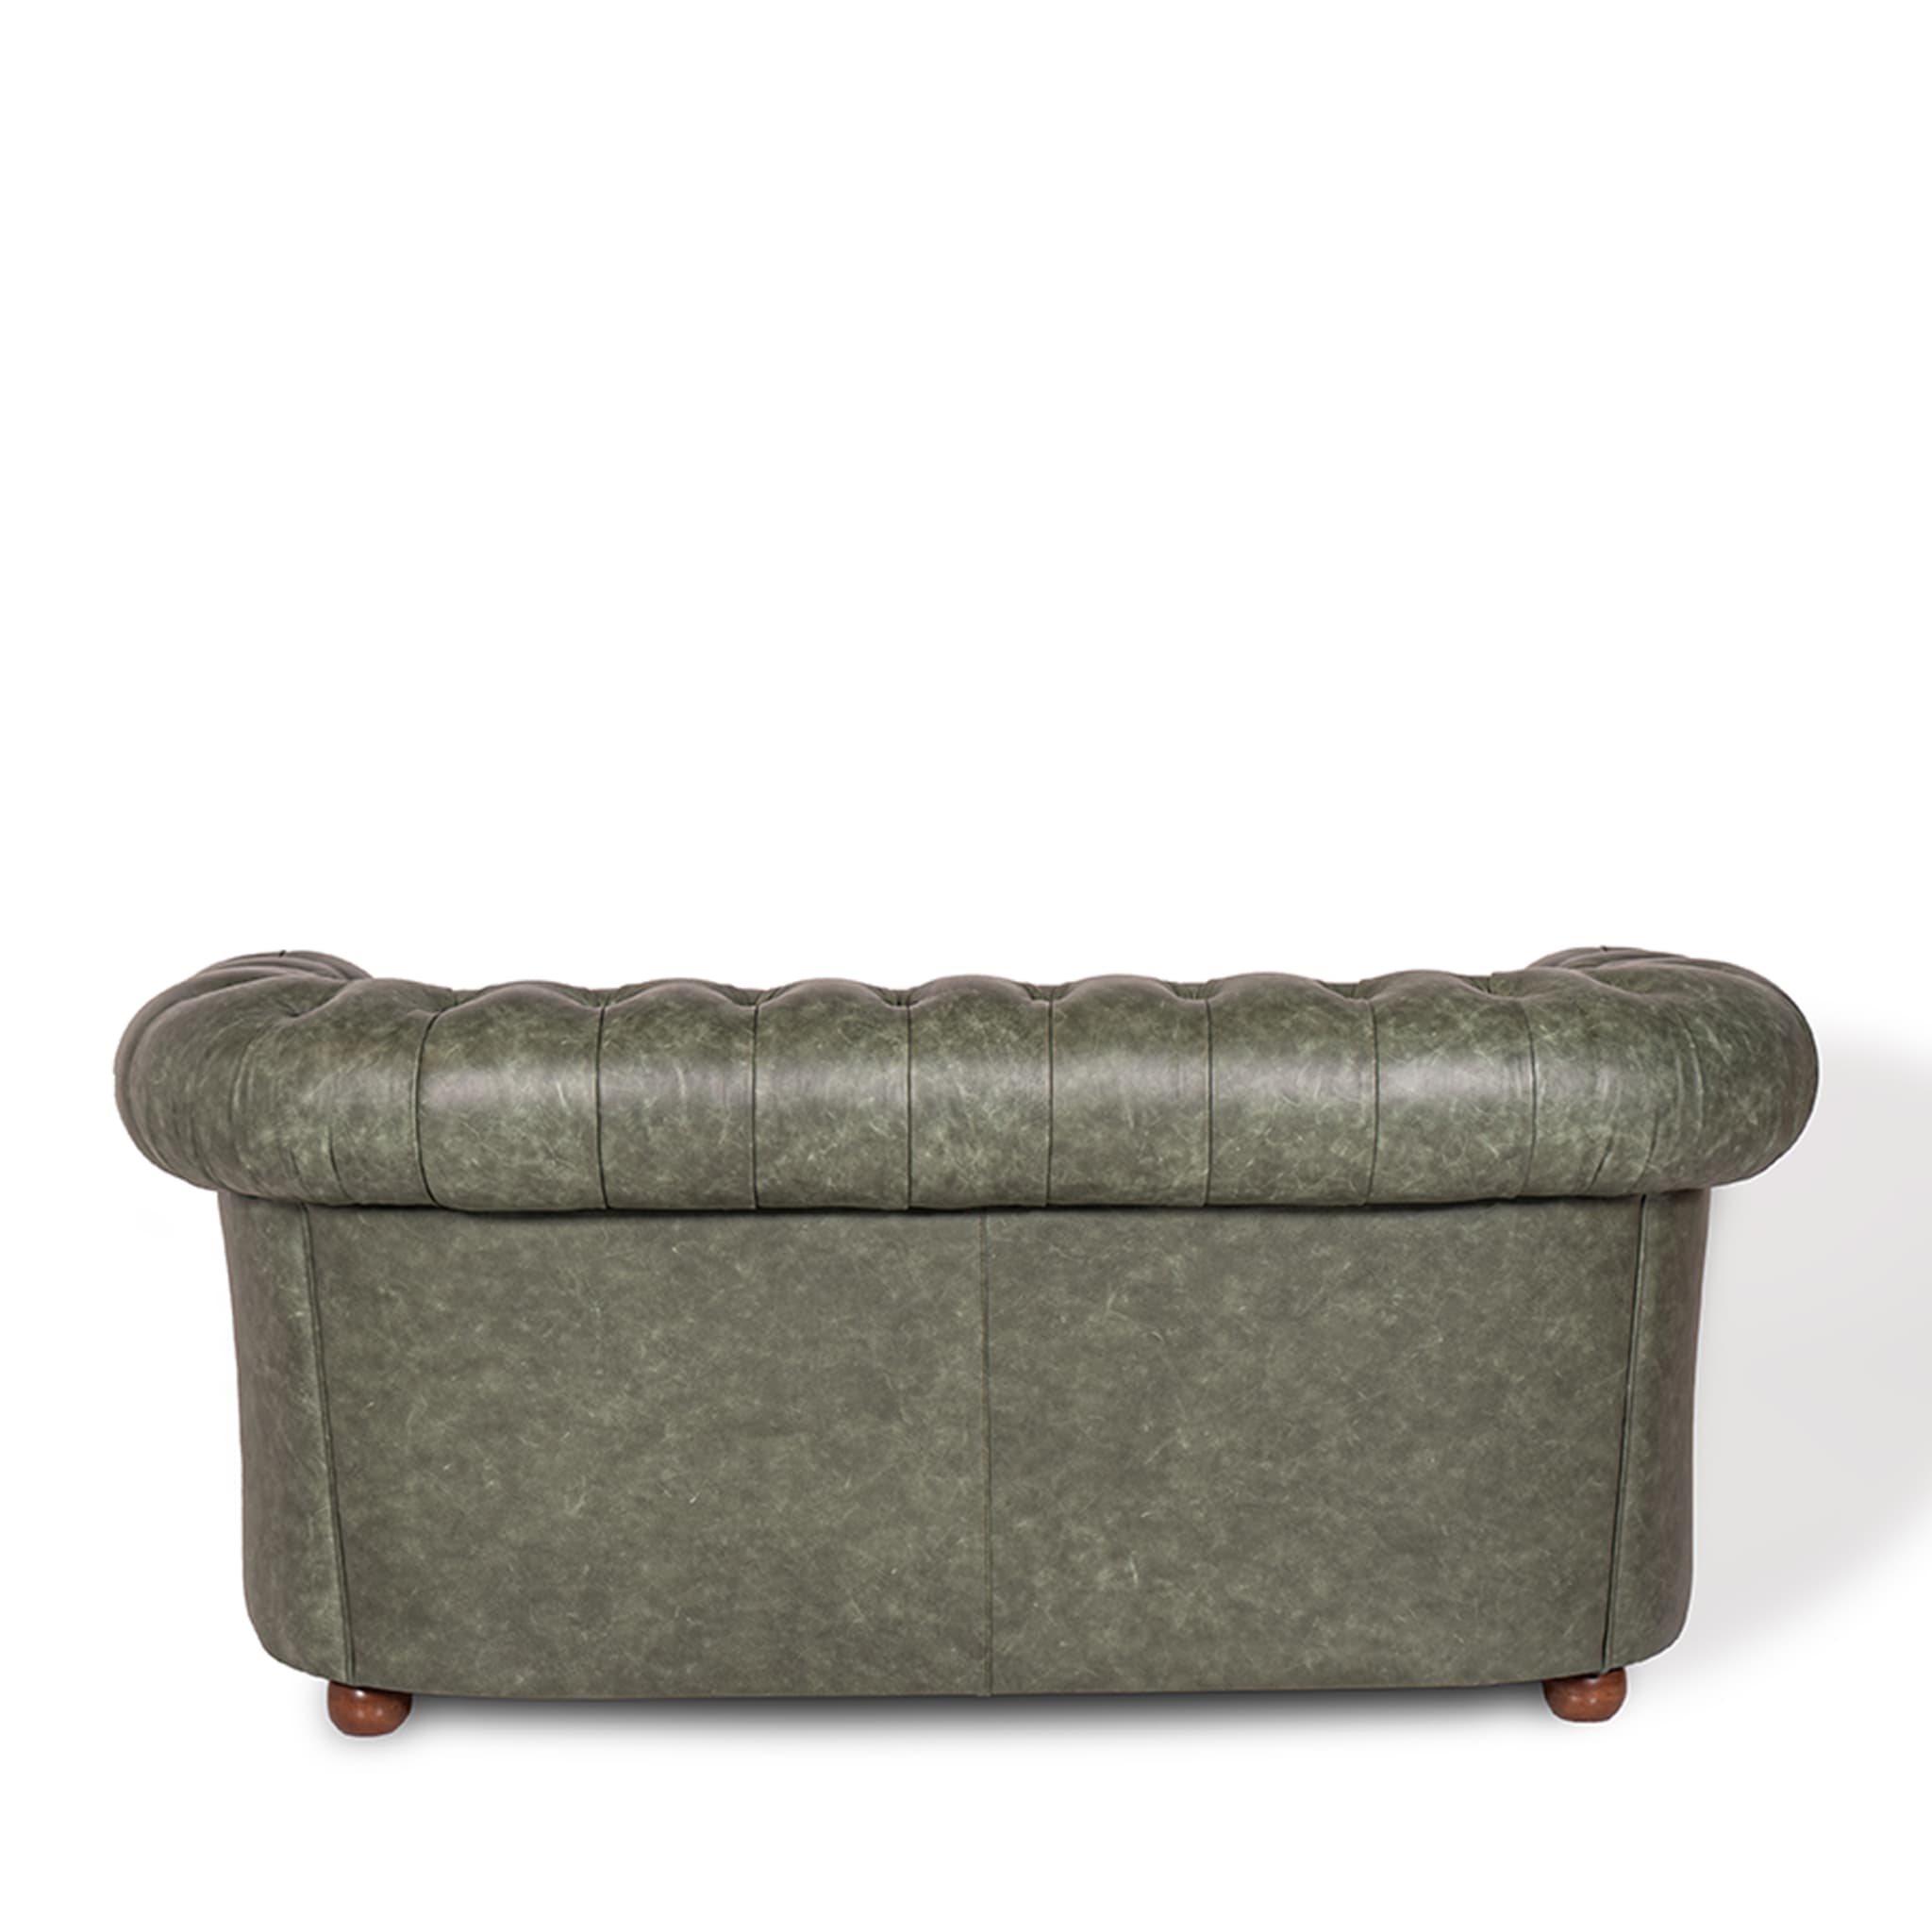 Chesterfield Green Leather Sofa - Alternative view 5